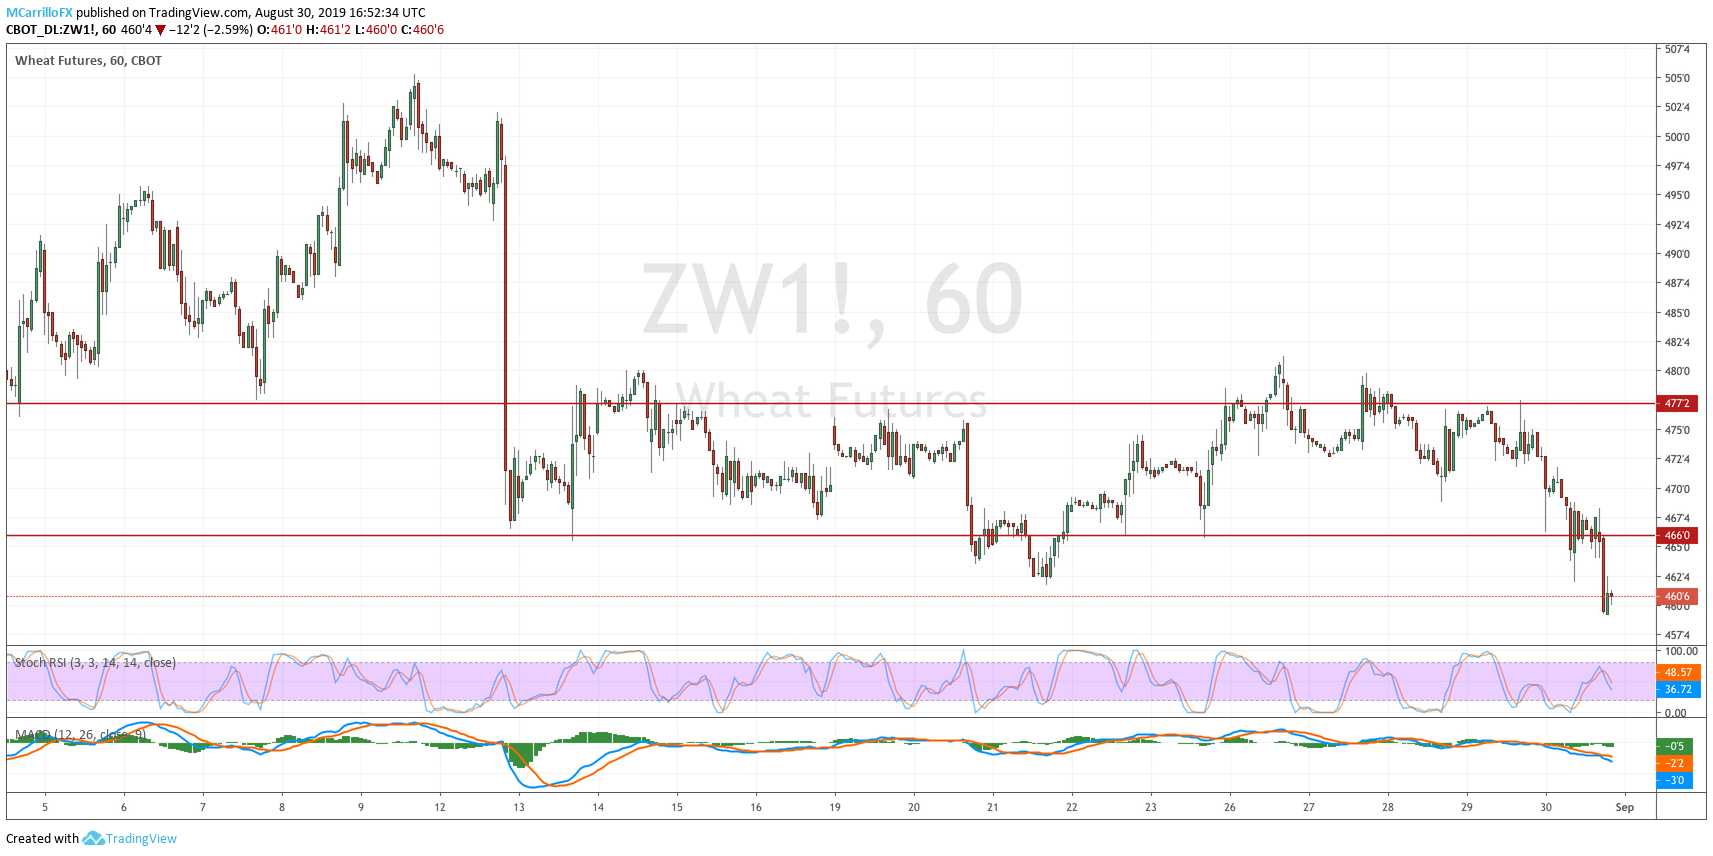 ZW1 Futures of Wheat 1-hour chart August 30